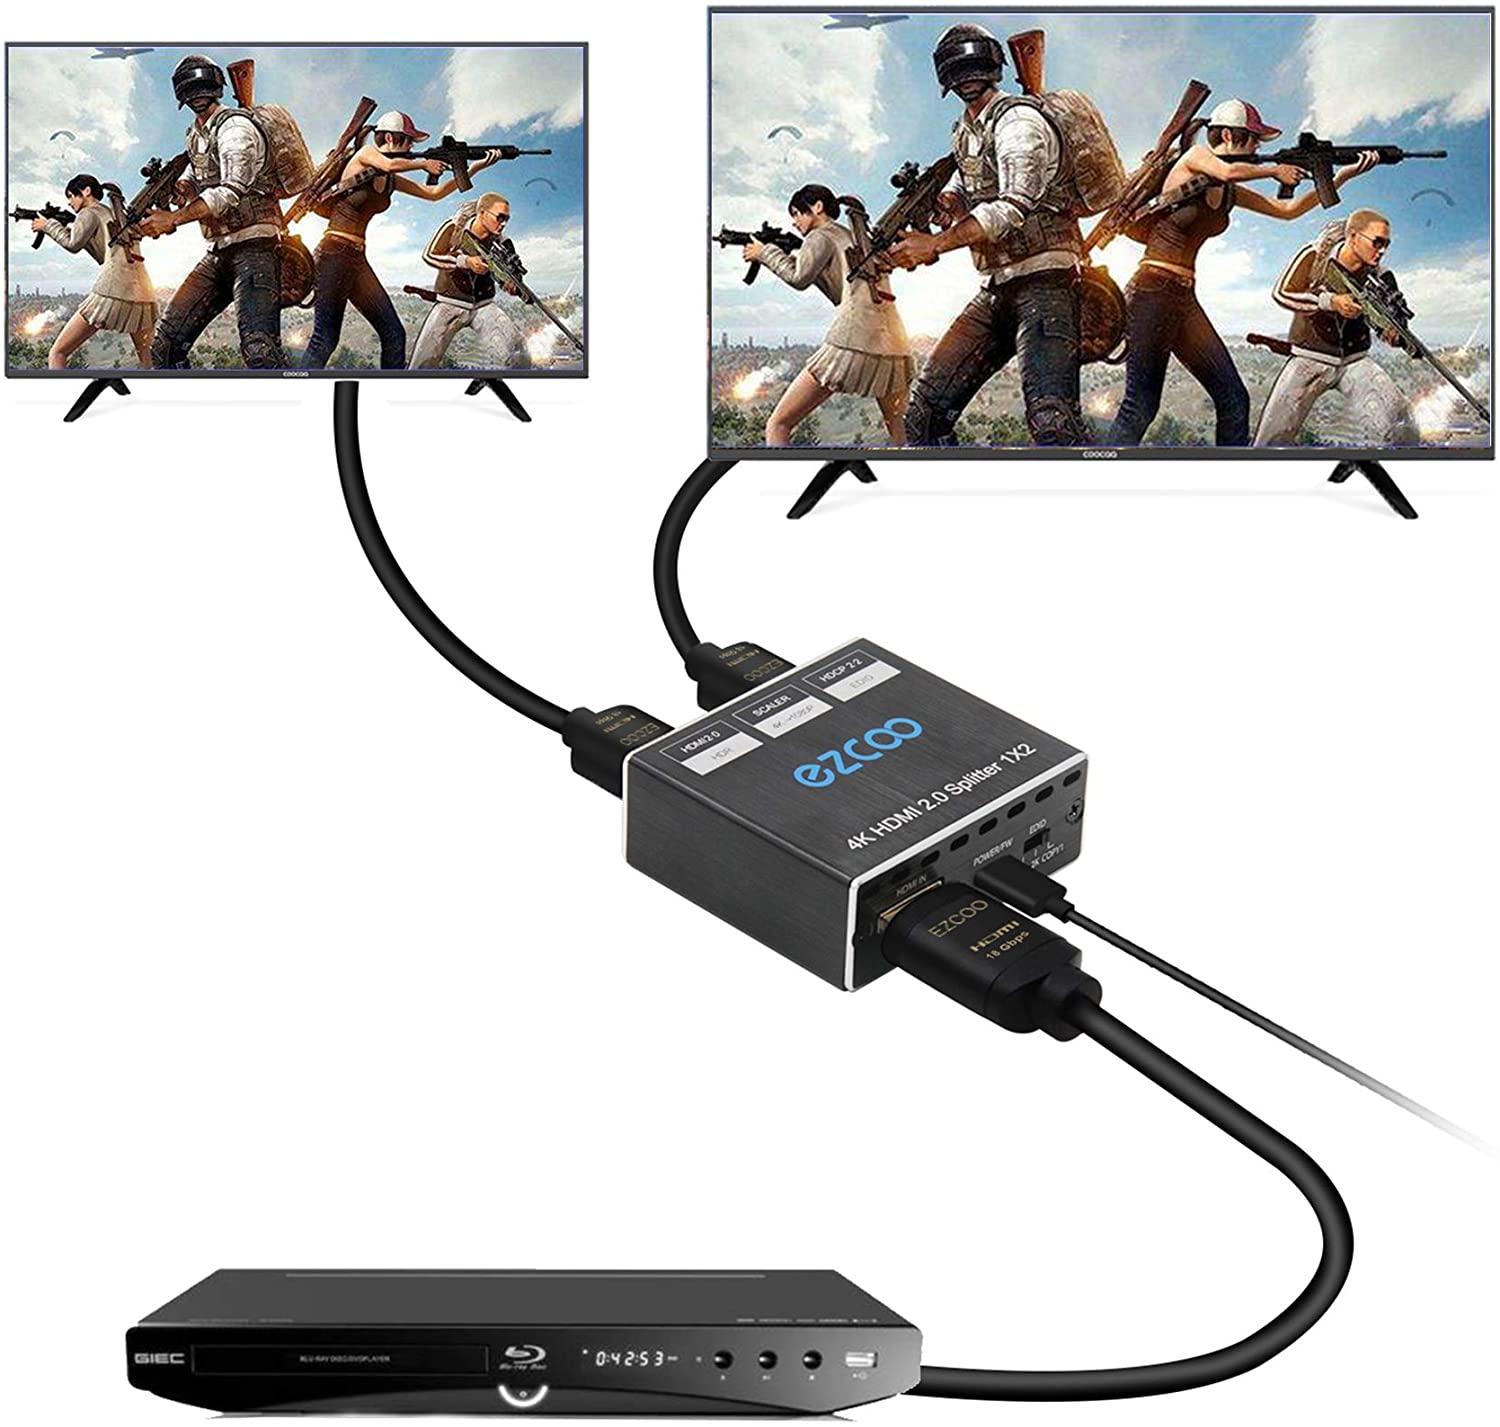 HDMI Splitter 1 in2 out 4K 60Hz 4:4:4 HDR Dolby Vision Dolby Atmos Firmware Upgrade HDCP2.2 Scaler 4K 1080P Scaler EDID Switch,USB Power